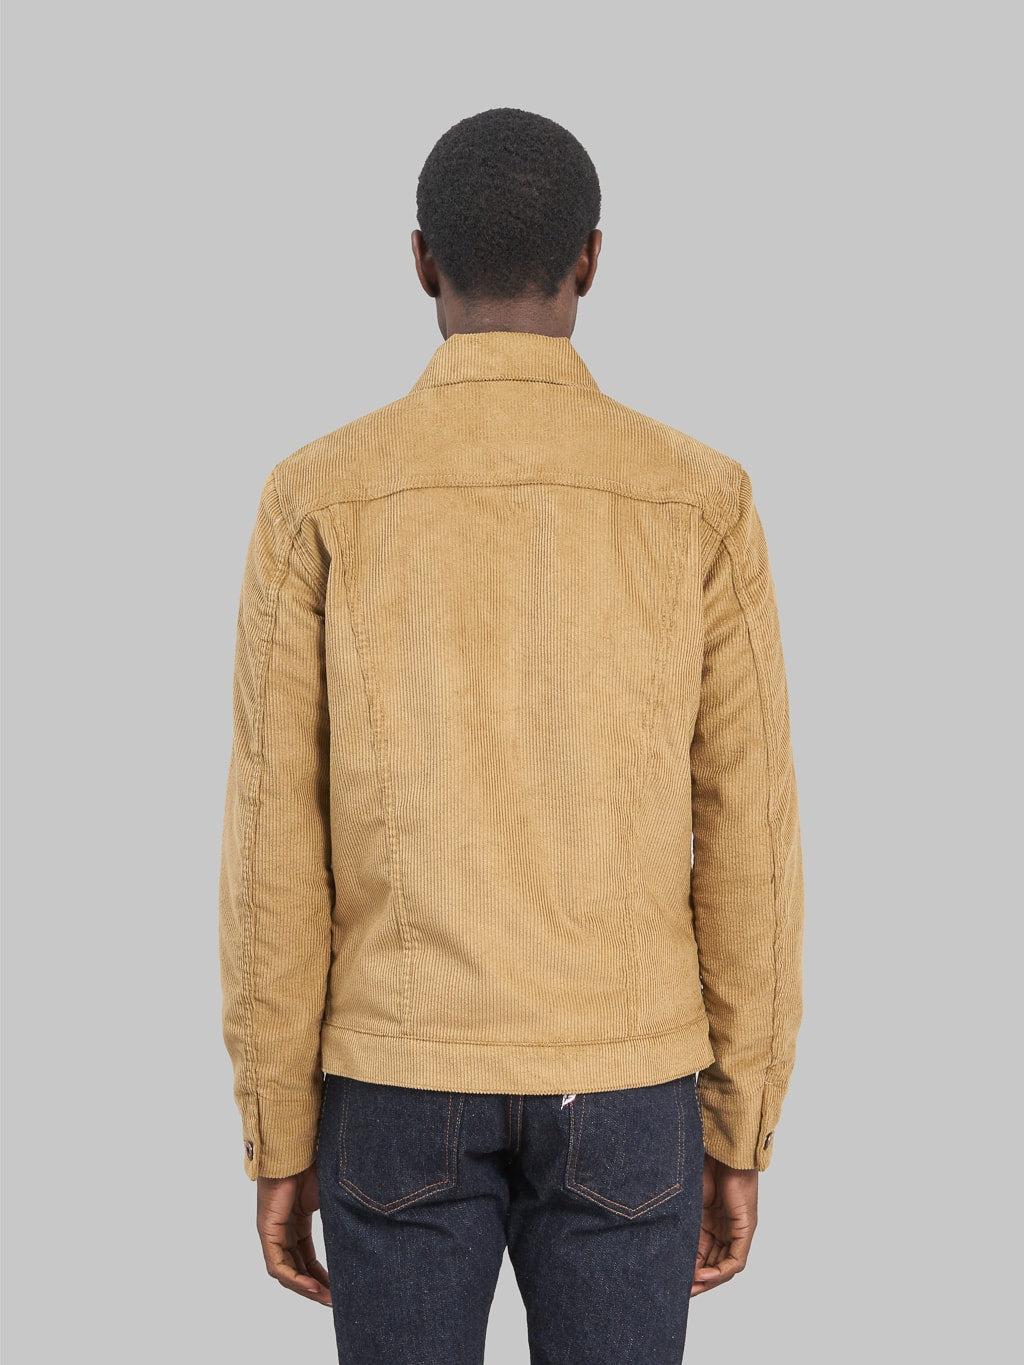 Rogue Territory Supply Jacket Lined Tan Corduroy back fit